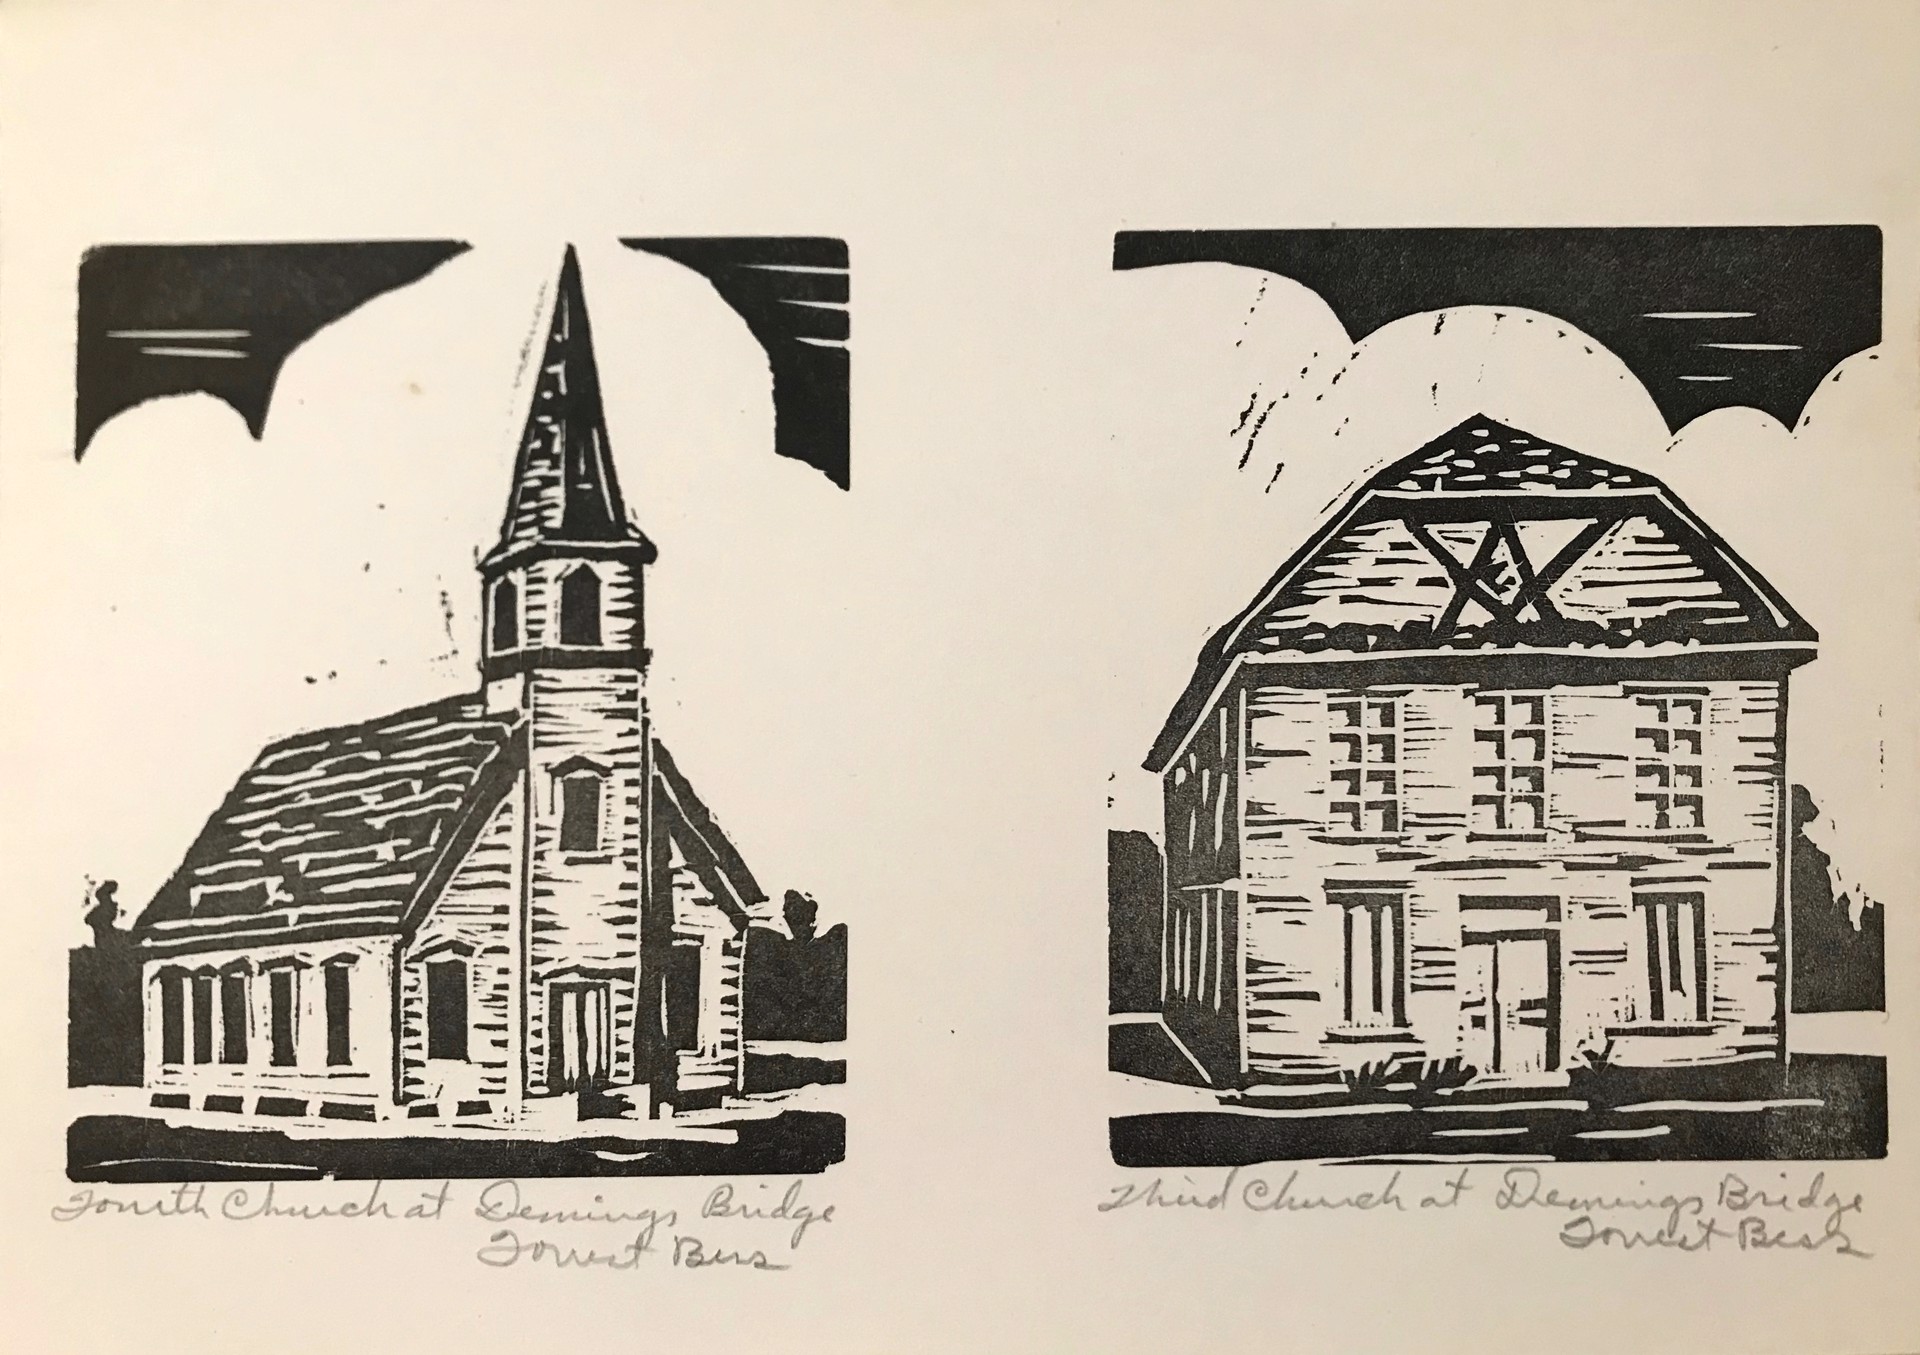 Fourth & Third Church at Deming's Bridge, Blessing, Texas by Forrest Bess